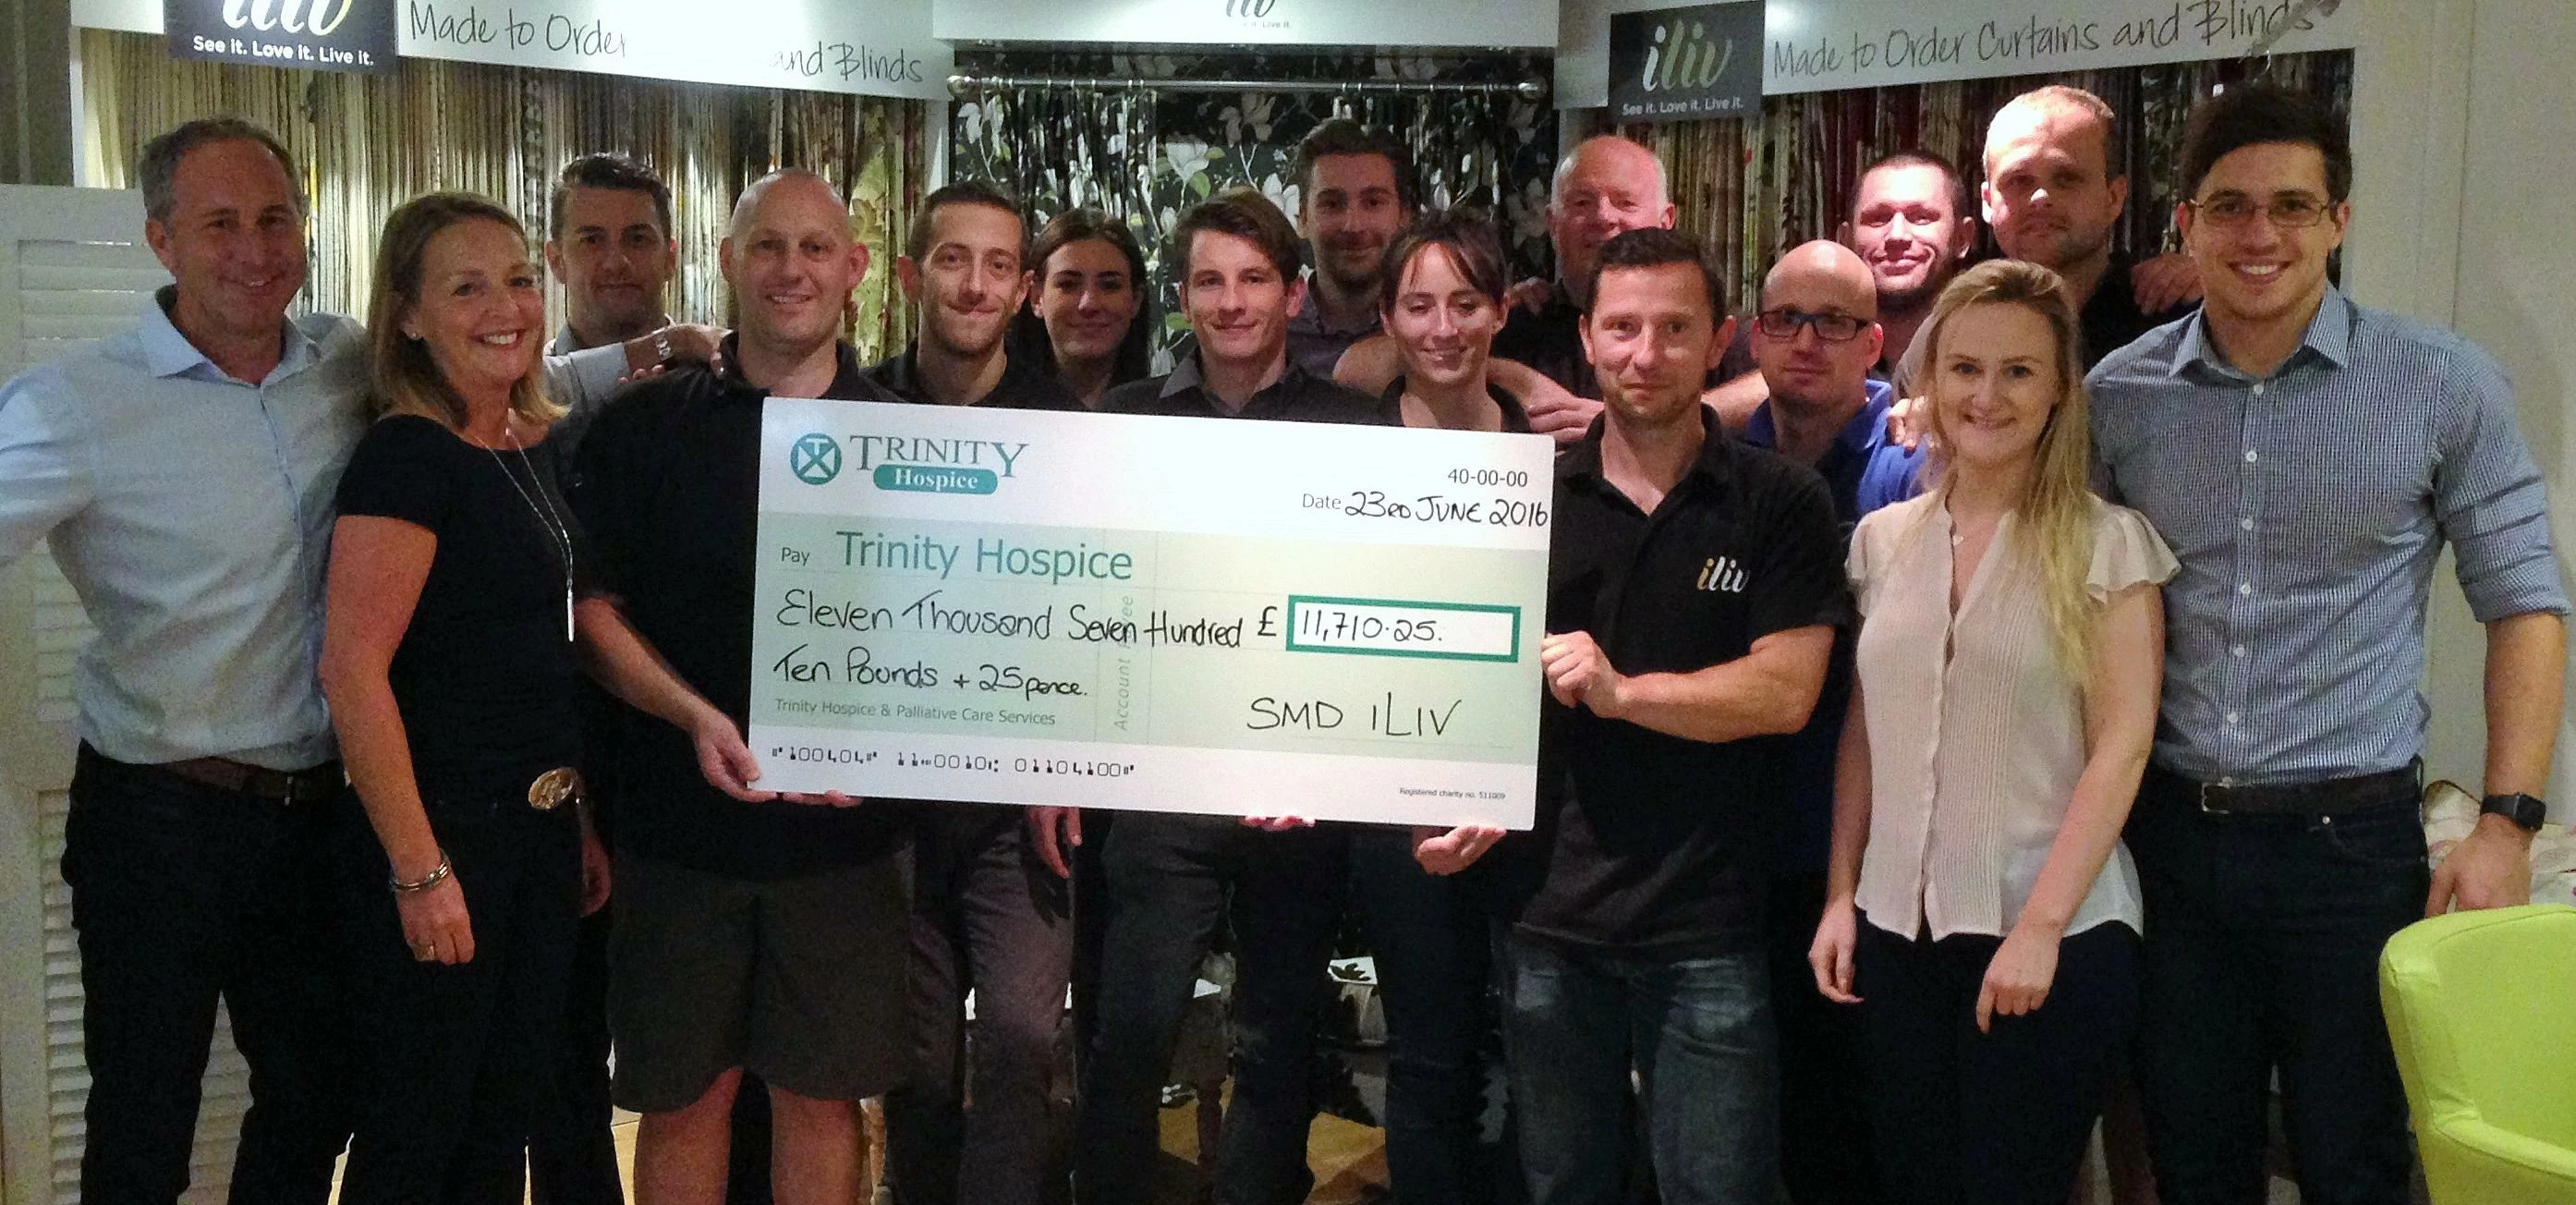 The SMD Group team presented the cheque to Trinity Hospice